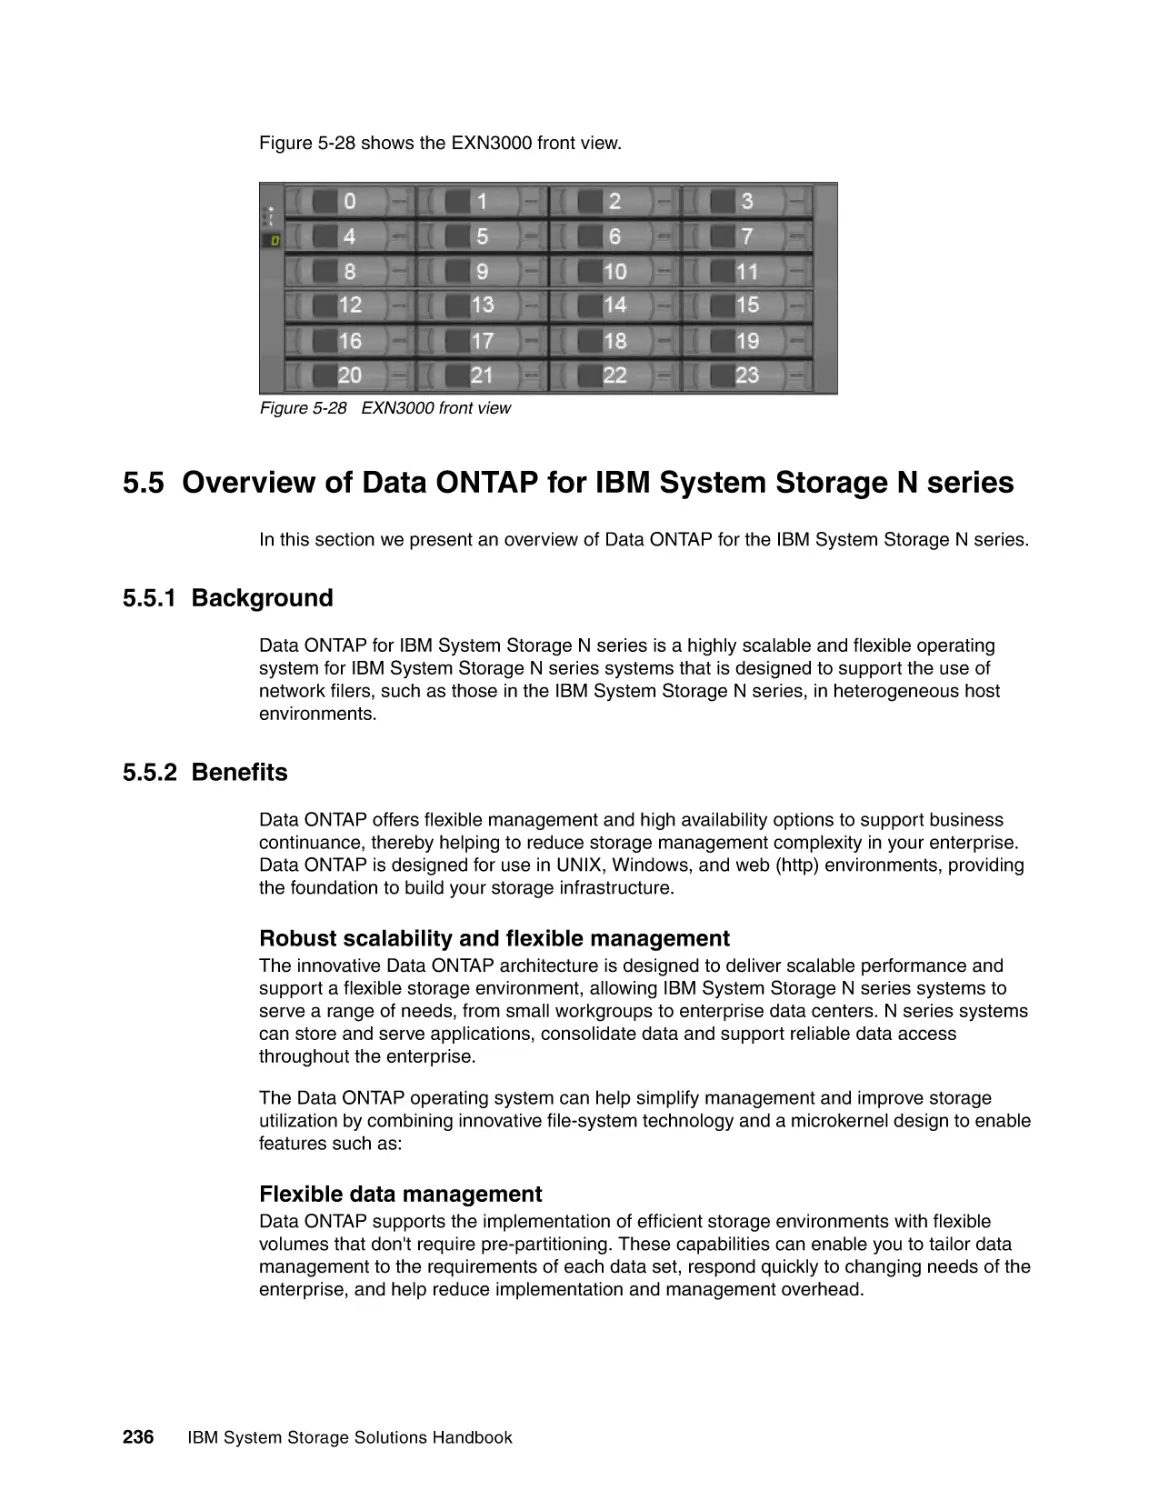 5.5 Overview of Data ONTAP for IBM System Storage N series
5.5.1 Background
5.5.2 Benefits